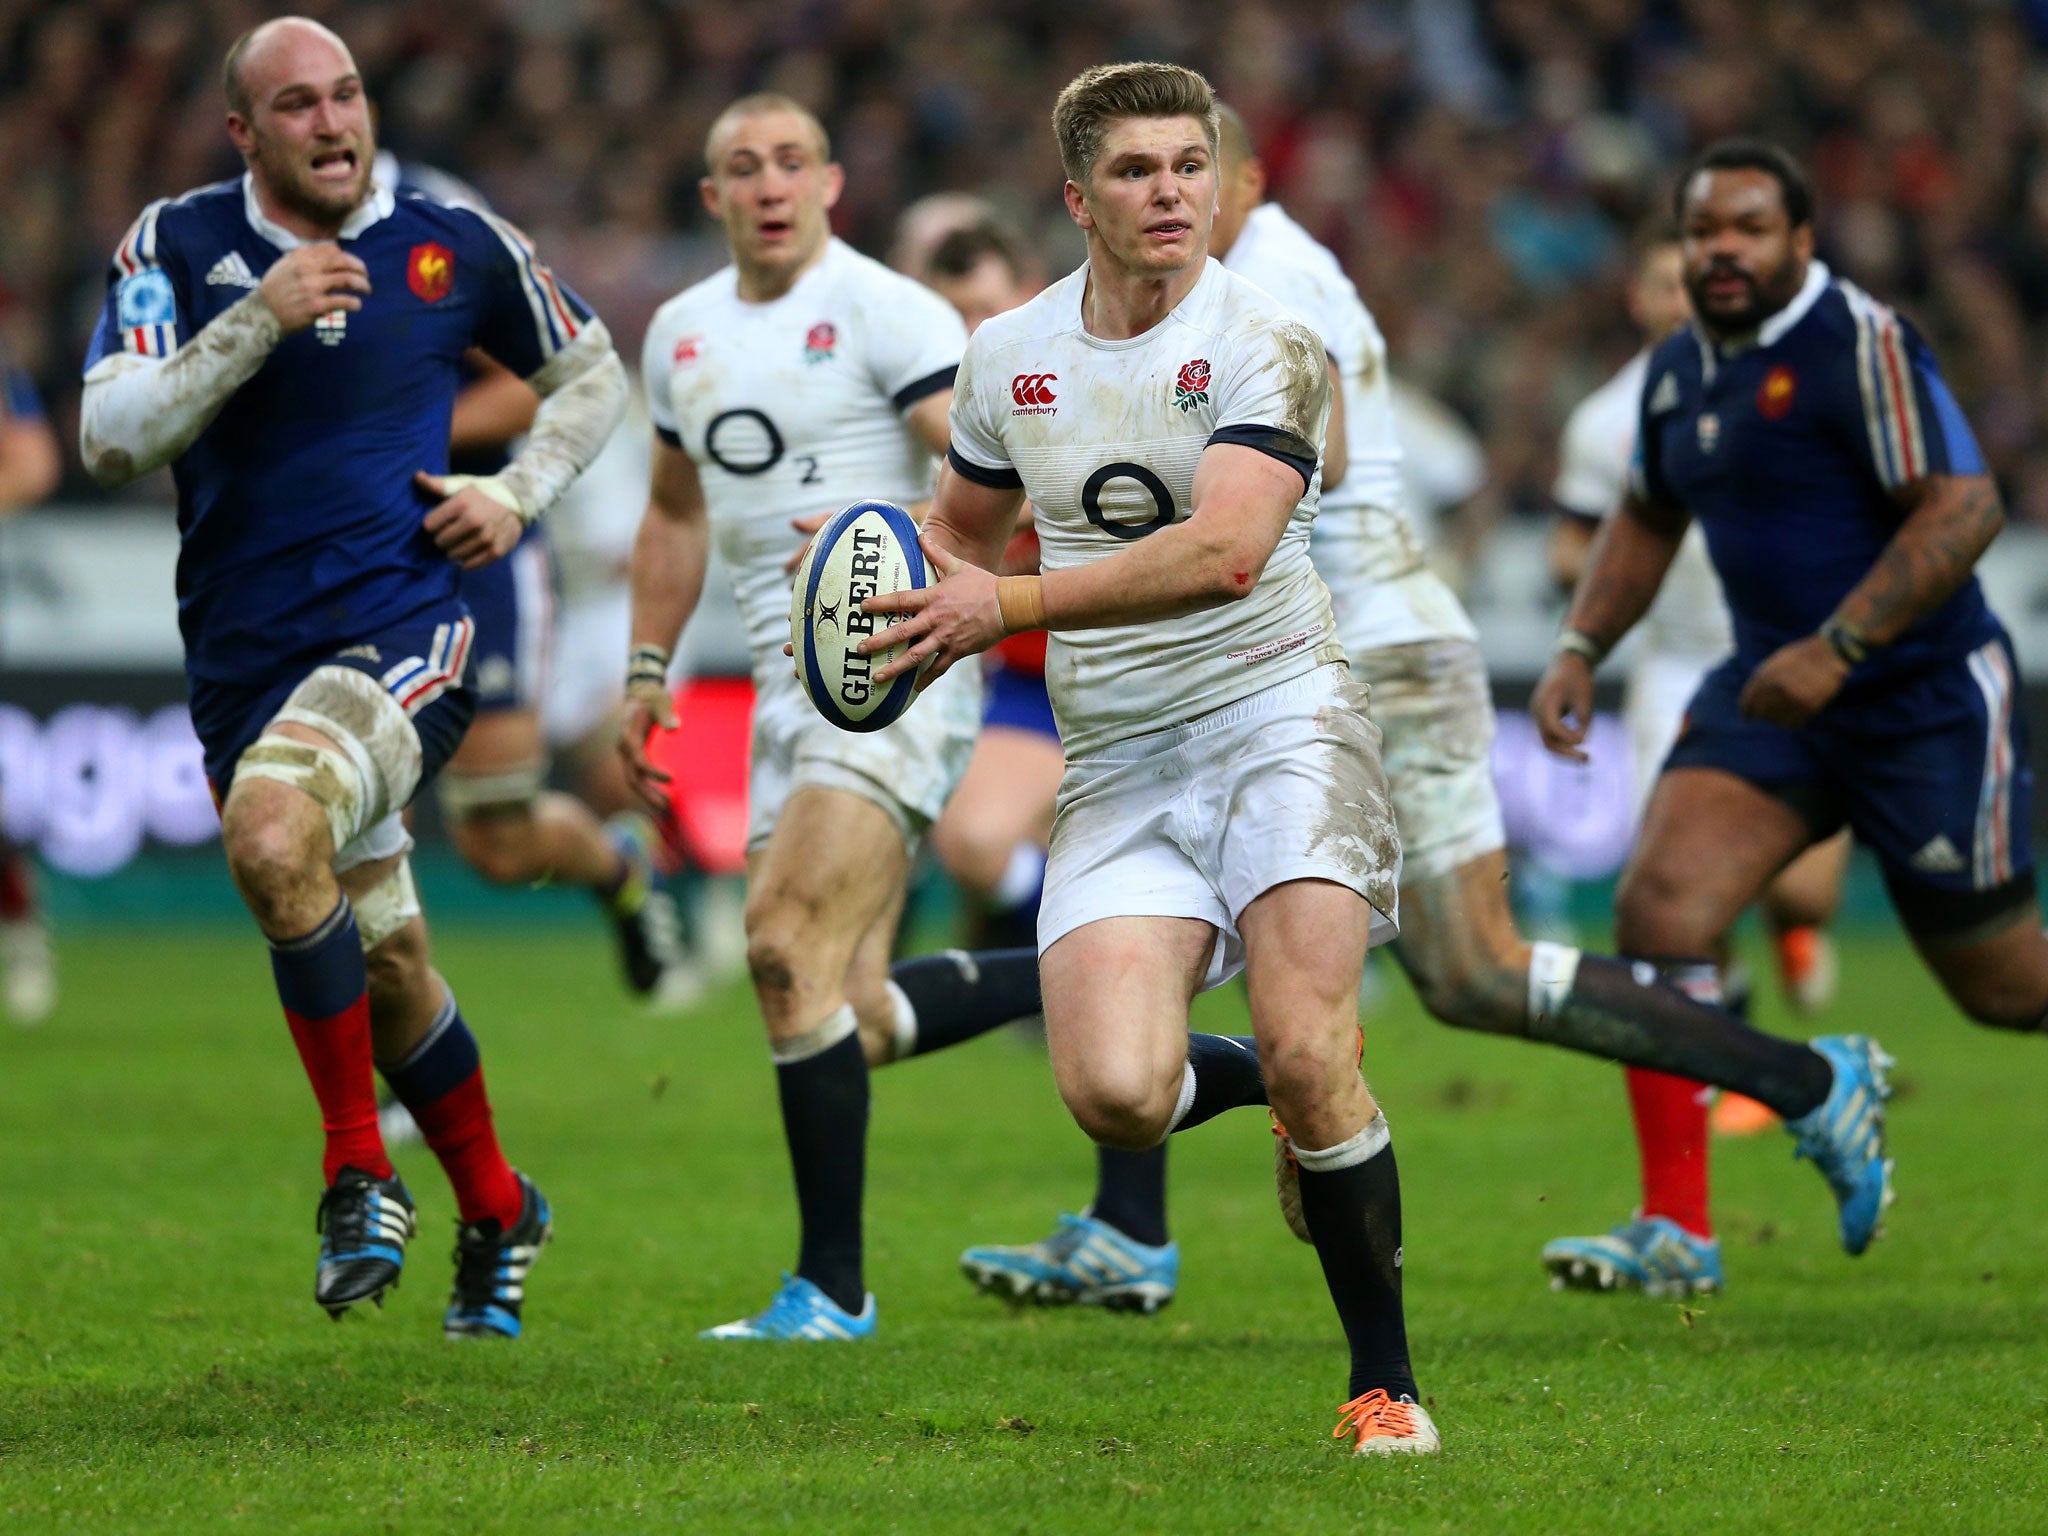 Owen Farrell could consider himself unlucky to end up on the losing side against France last week after excelling in his fly-half role